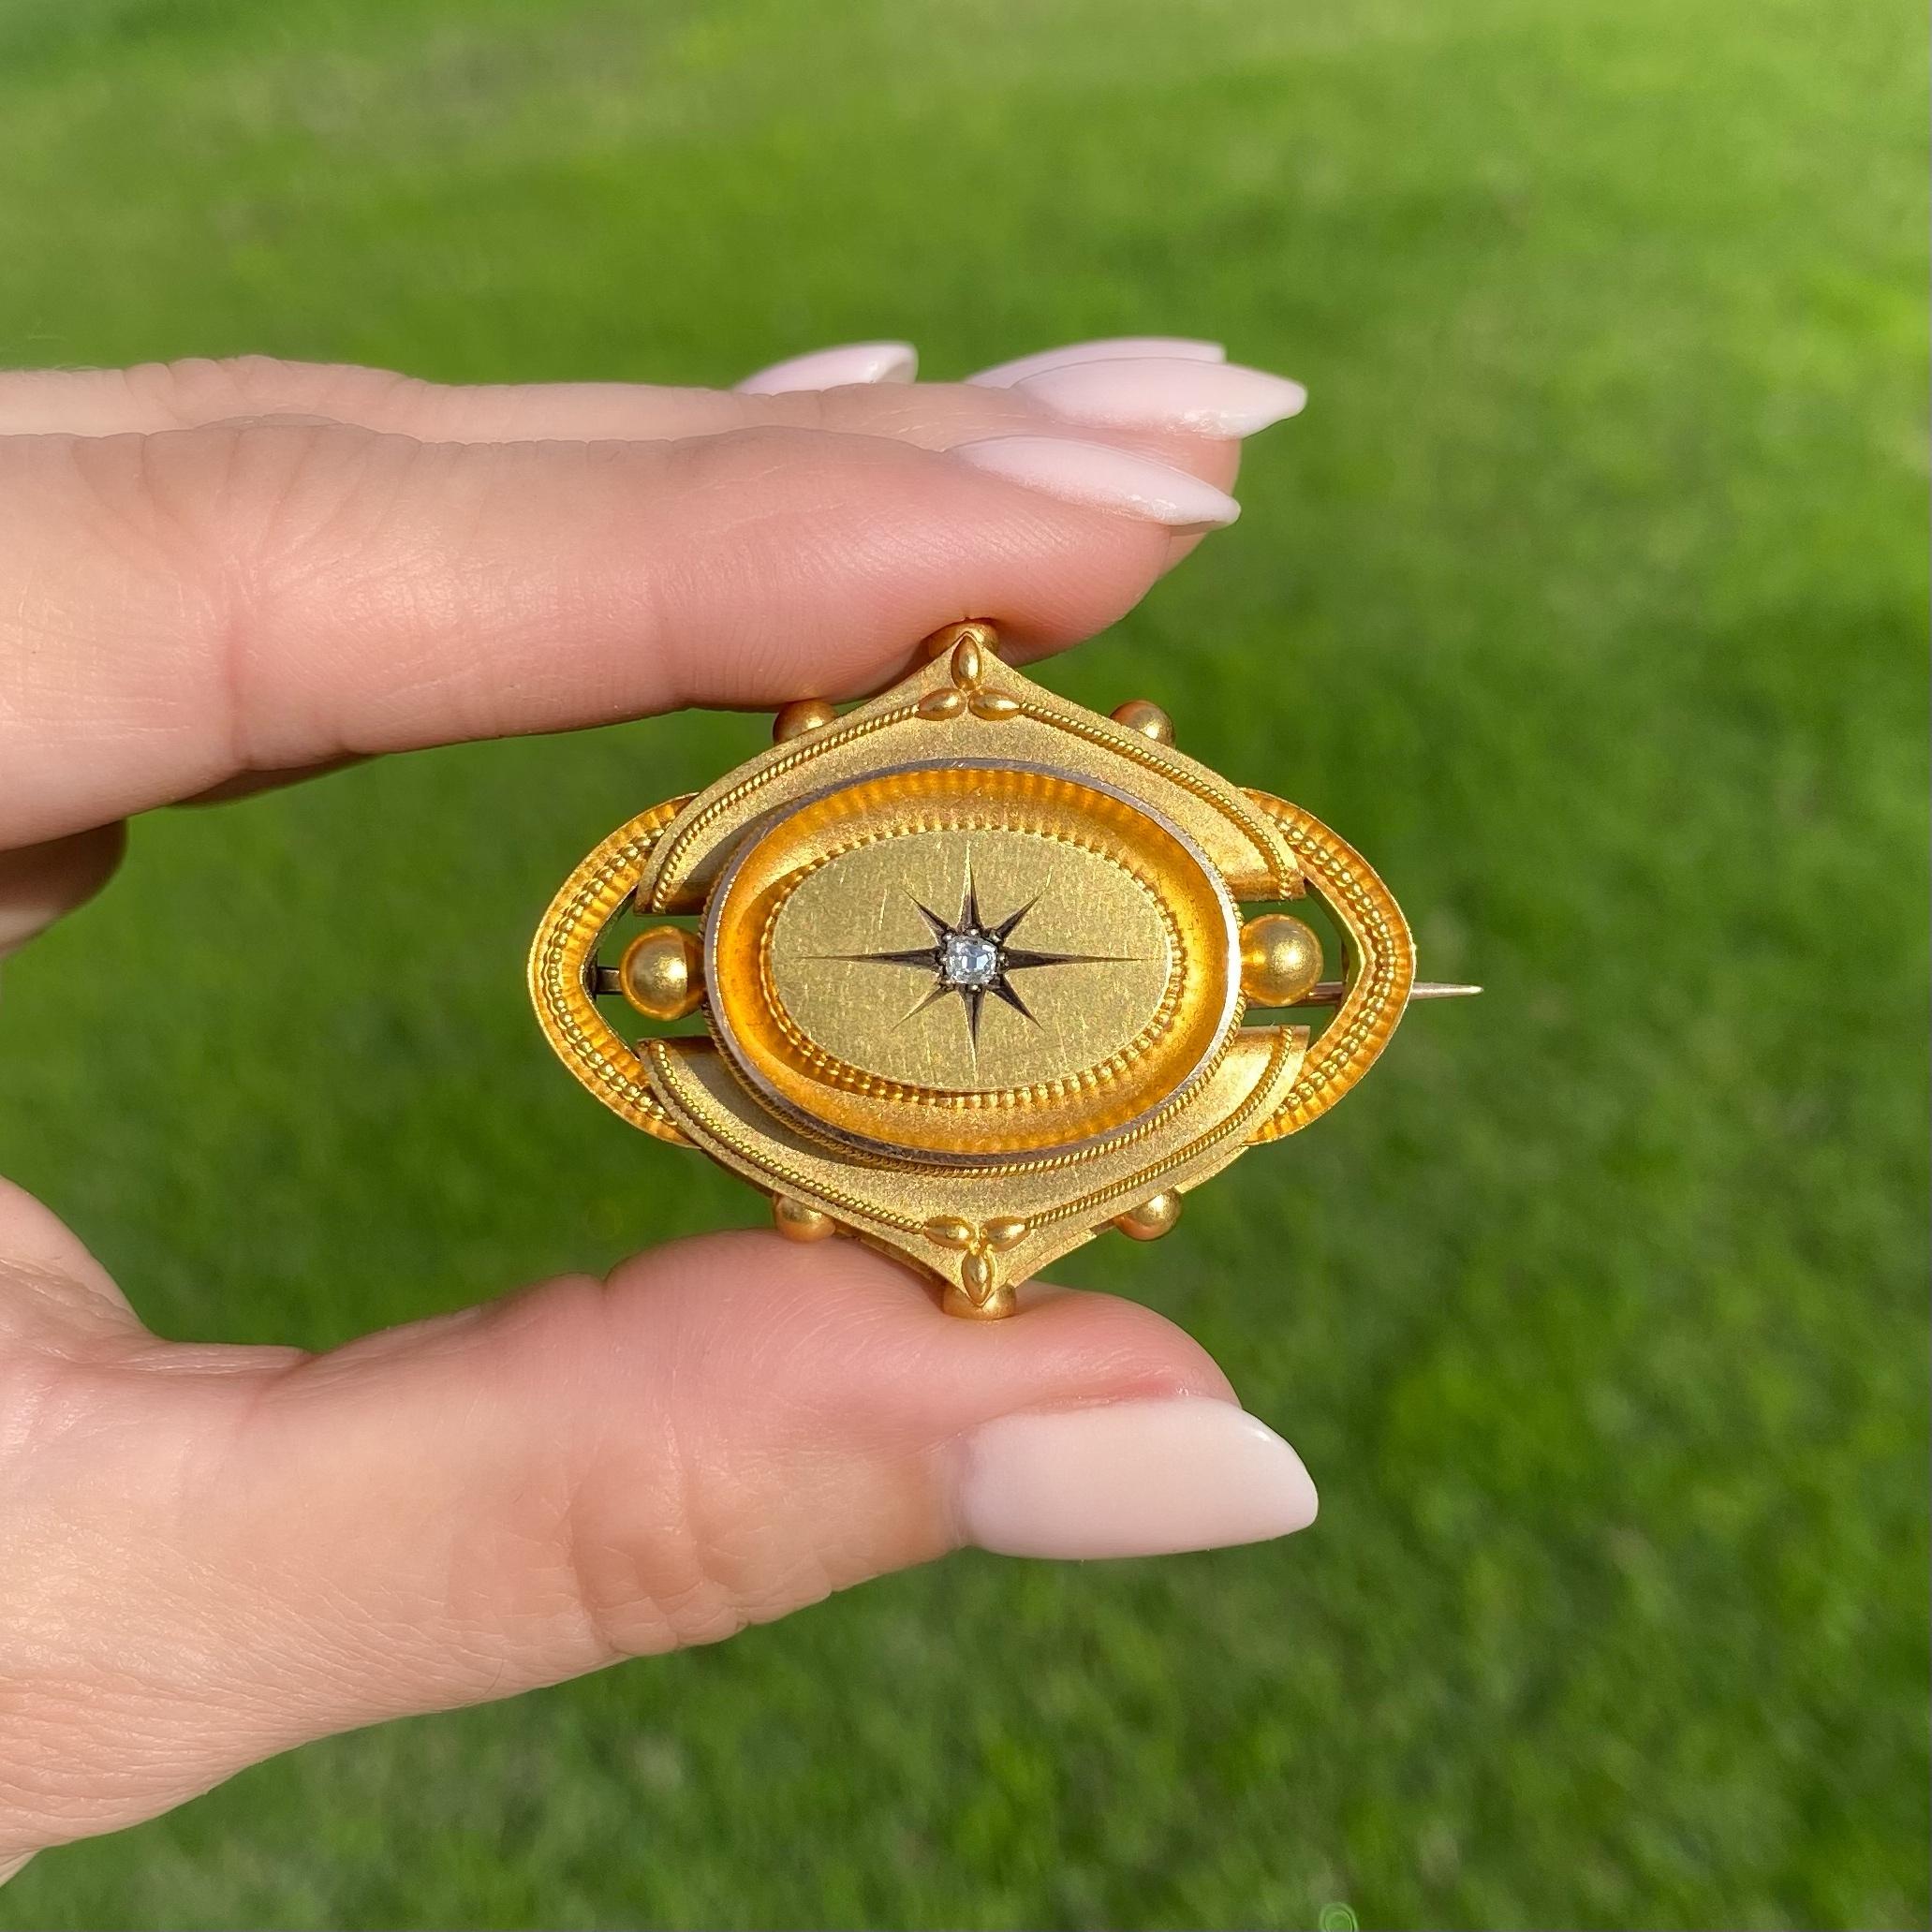 Simply Beautiful! Finely detailed Antique Victorian Diamond 15K Gold Locket Brooch. Center set with a 0.12ct Diamond. Hand crafted in 15 Karat Yellow Gold. Approx. 1.75” L x 1.43” W. The Brooch epitomizes vintage charm and is in excellent condition.